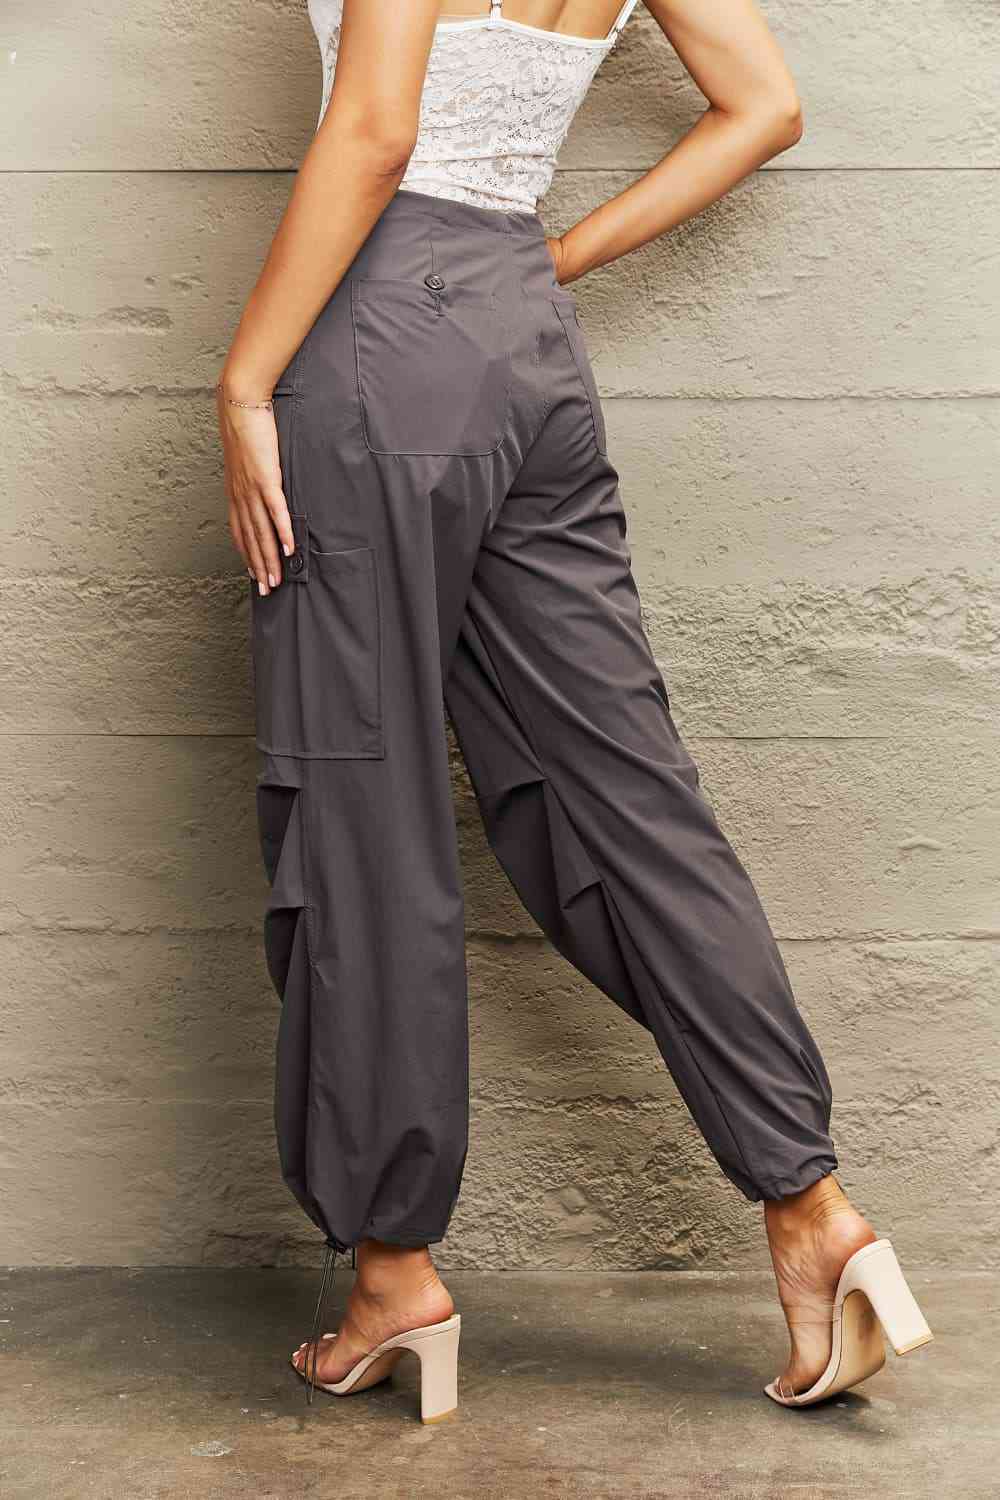 Drawstring Waist Joggers with Pockets - GemThreads Boutique